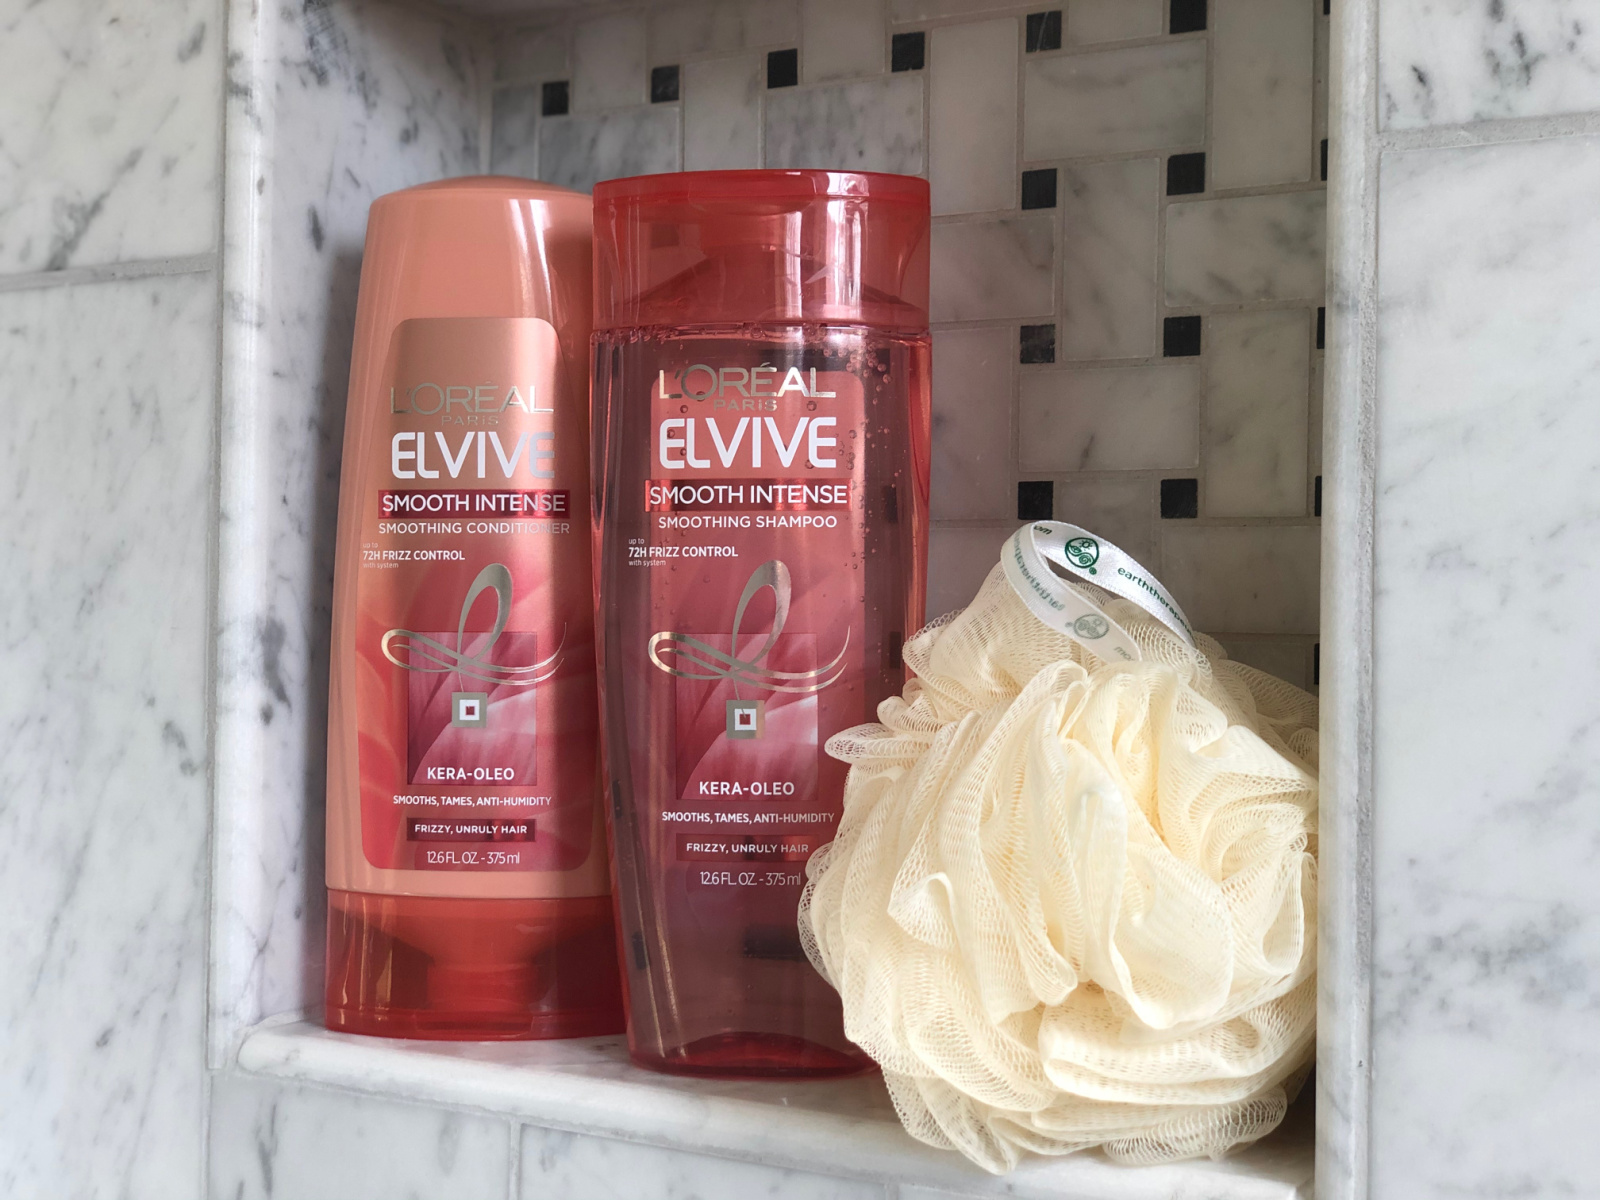 L’Oreal Elvive Haircare Just $2.49 Per Bottle At Publix